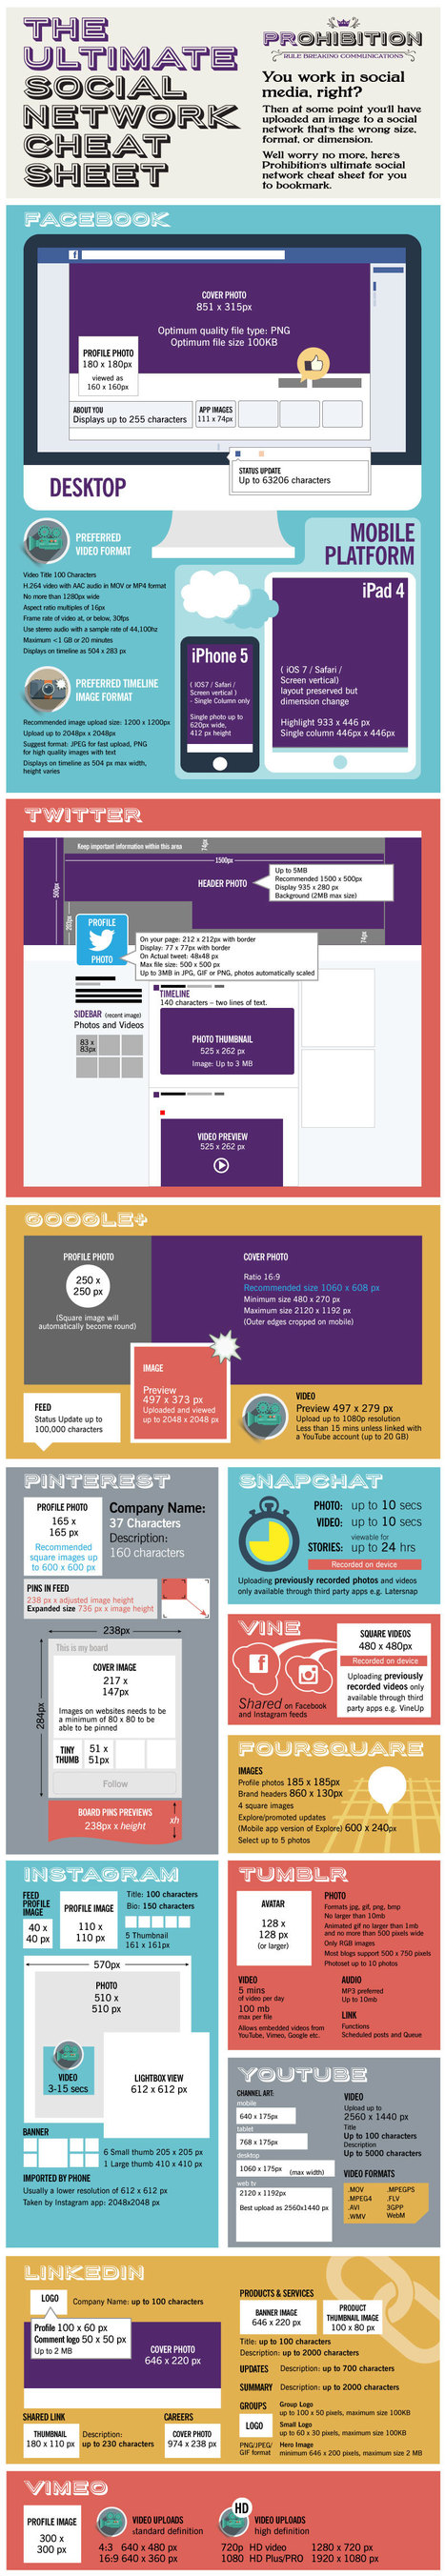 The Ultimate Social Network Cheat Sheet [Infographic] - Profs | digital marketing strategy | Scoop.it